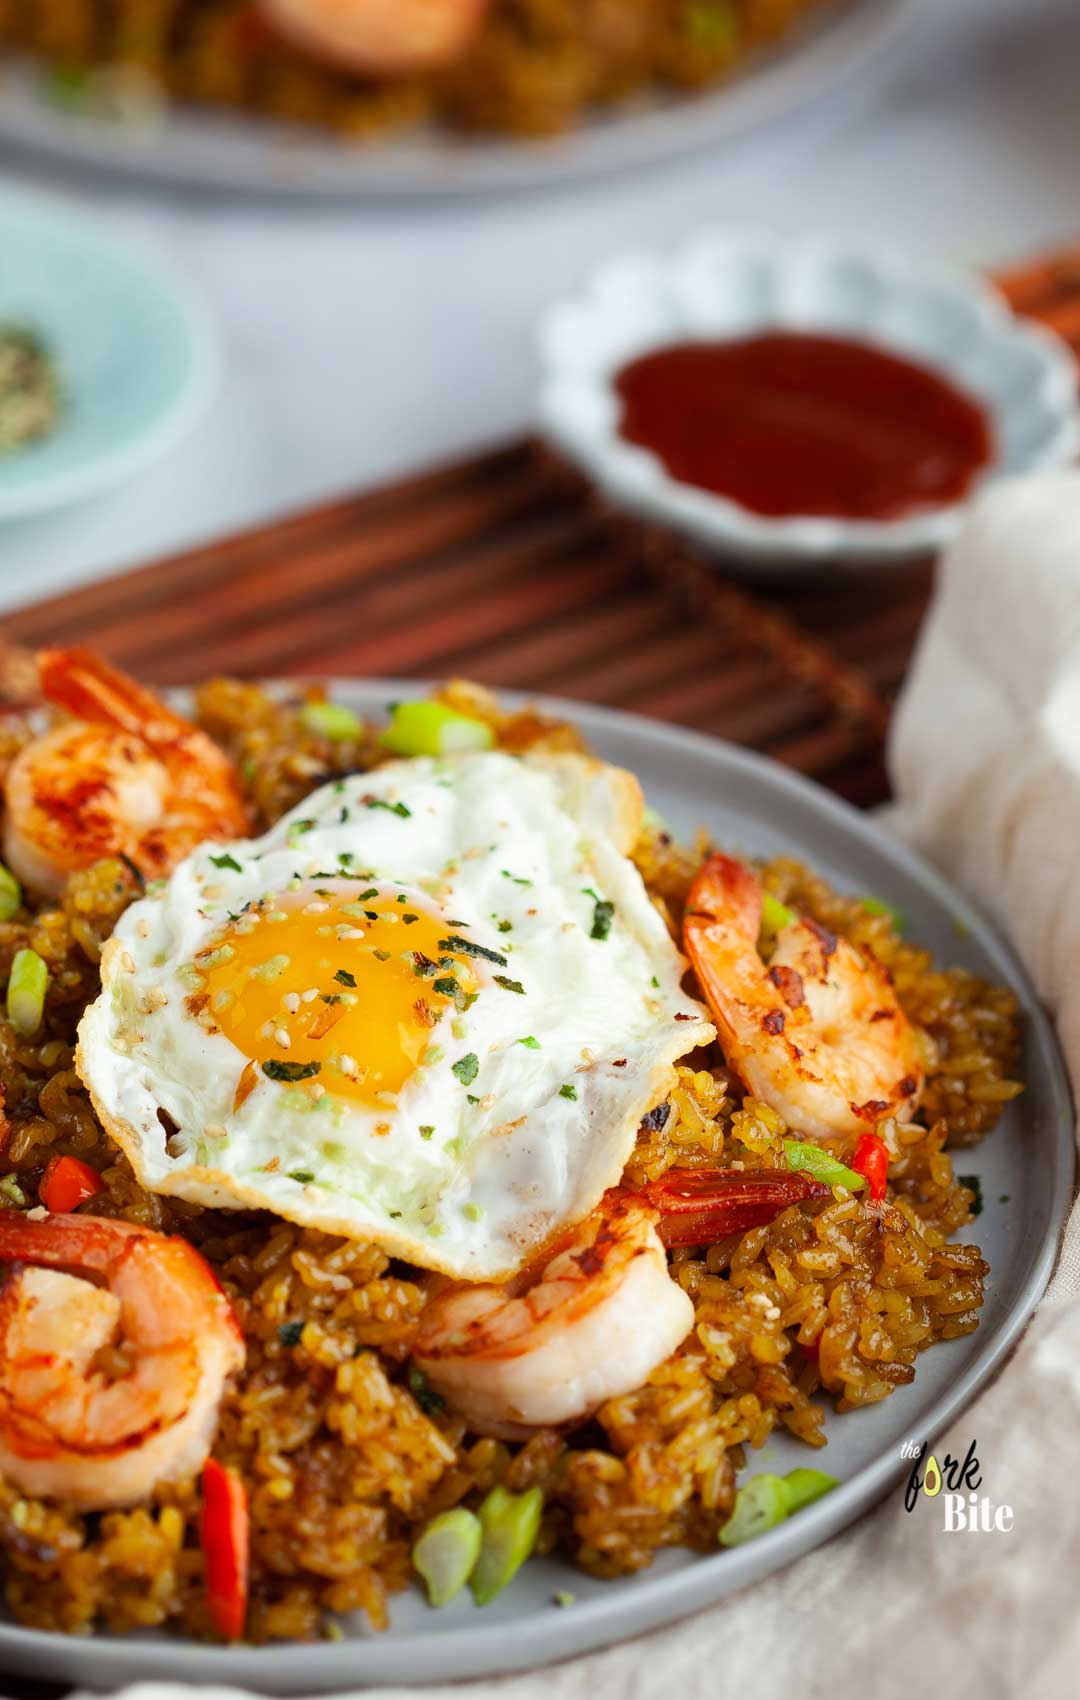 I can make nasi goreng with and without belacan. That is how tasty nasi goreng is. It can stand on its own even without the dried shrimp.